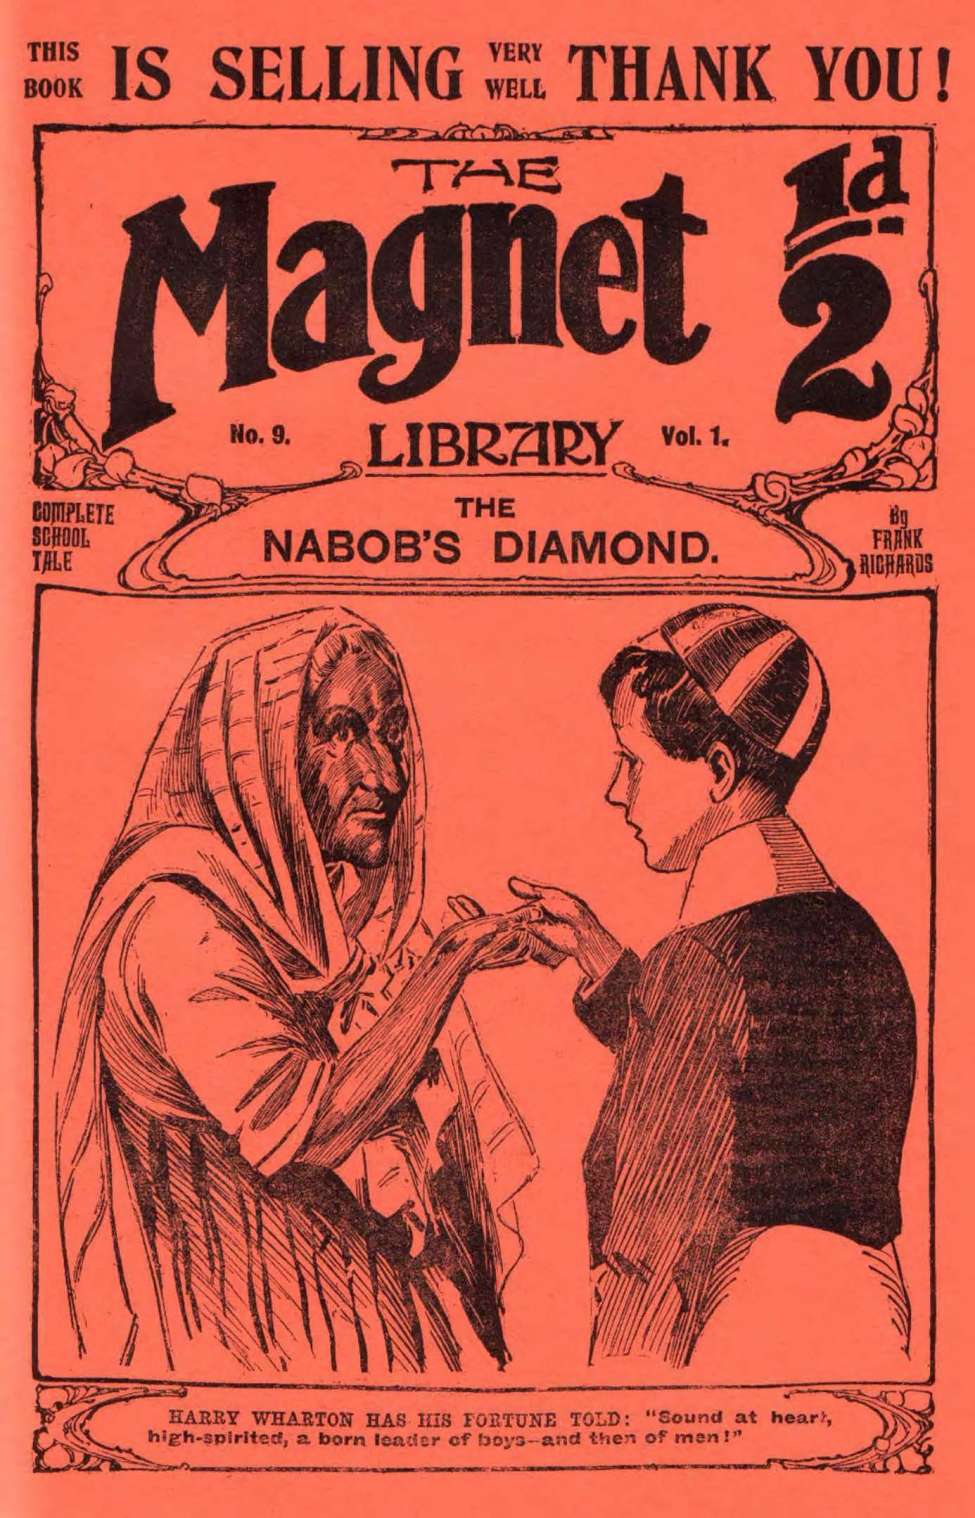 Comic Book Cover For The Magnet 9 - The Nabob's Diamond